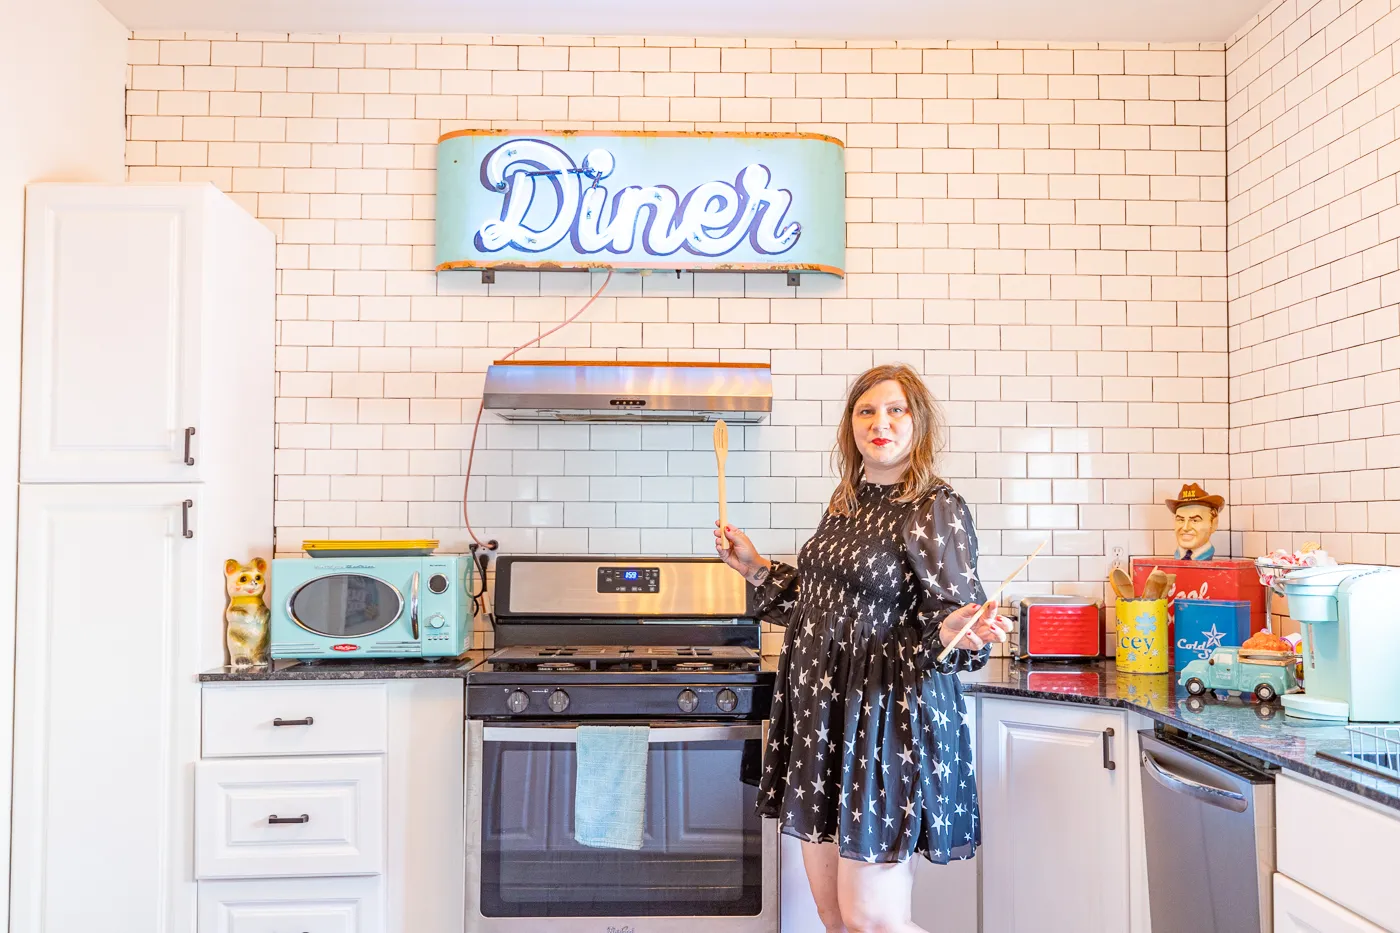 Retro kitchen at Buck's Cosmic Crash Pad on Route 66 - Route 66 AirBNB in Tulsa, Oklahoma